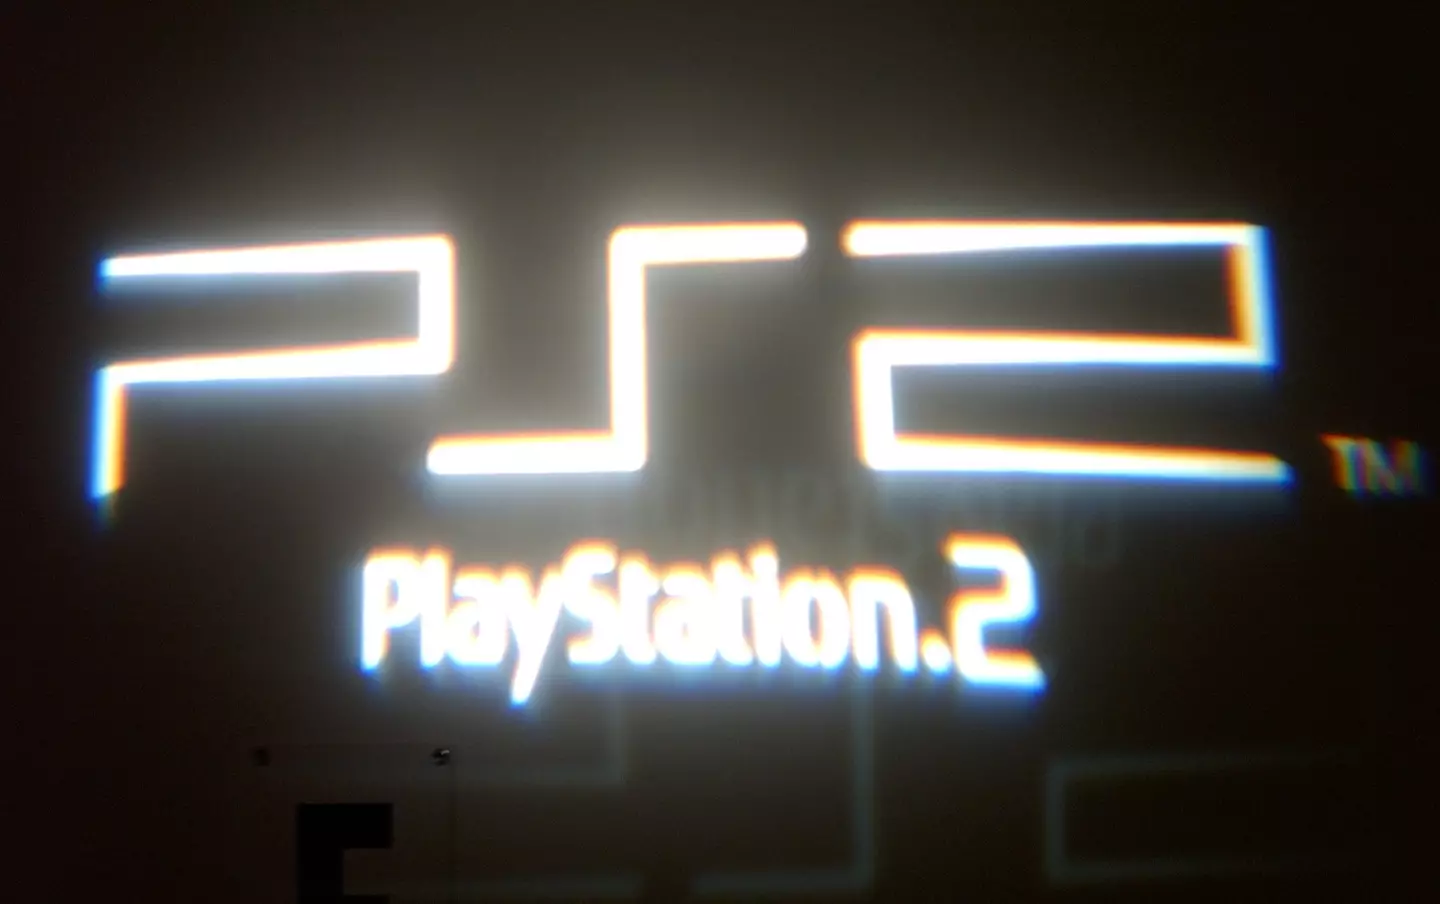 The game was available on PS2.